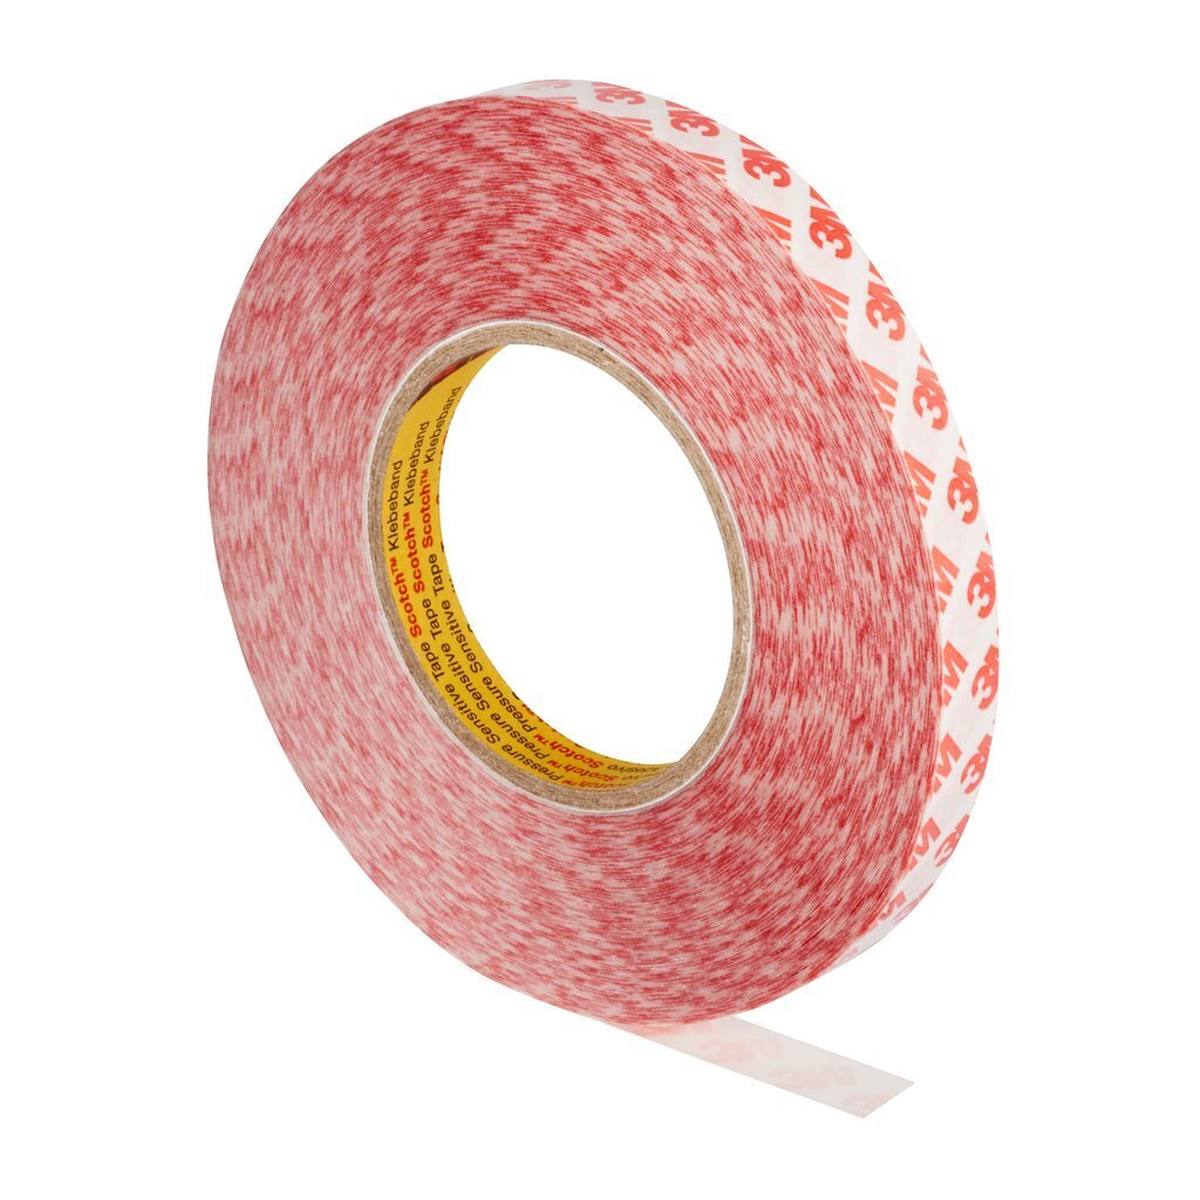 3M Double-sided adhesive tape with polyester backing 9088-200, transparent, 15 mm x 50 m, 0.2 mm